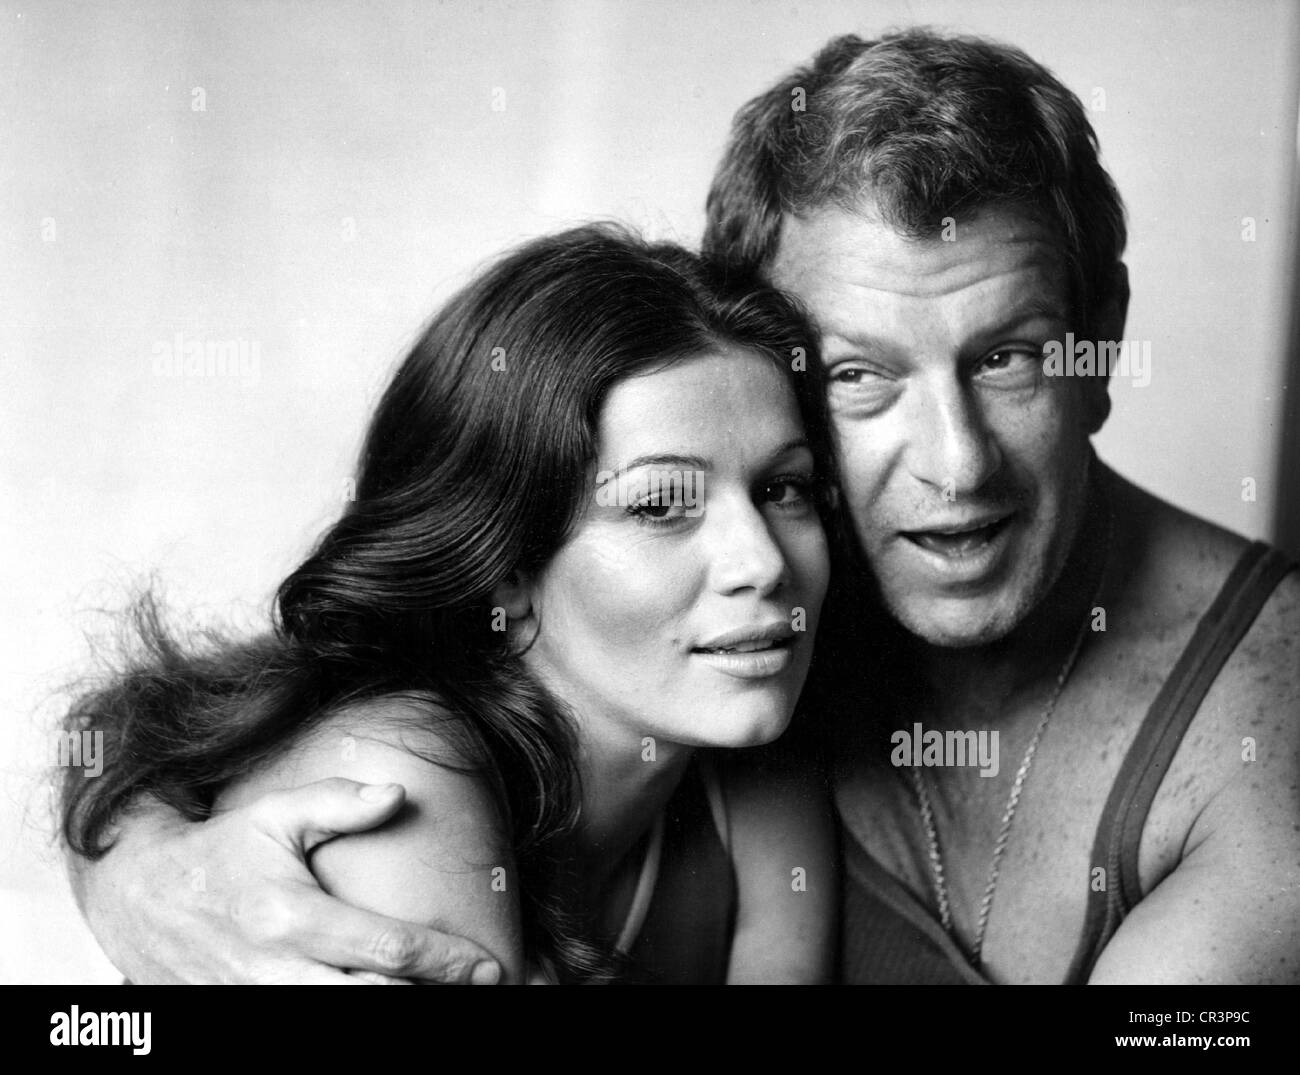 Elsner, Hannelore, * 26.7.1942, portrait, with Ullrich Haupt, in a German TV movie, 1968, Stock Photo